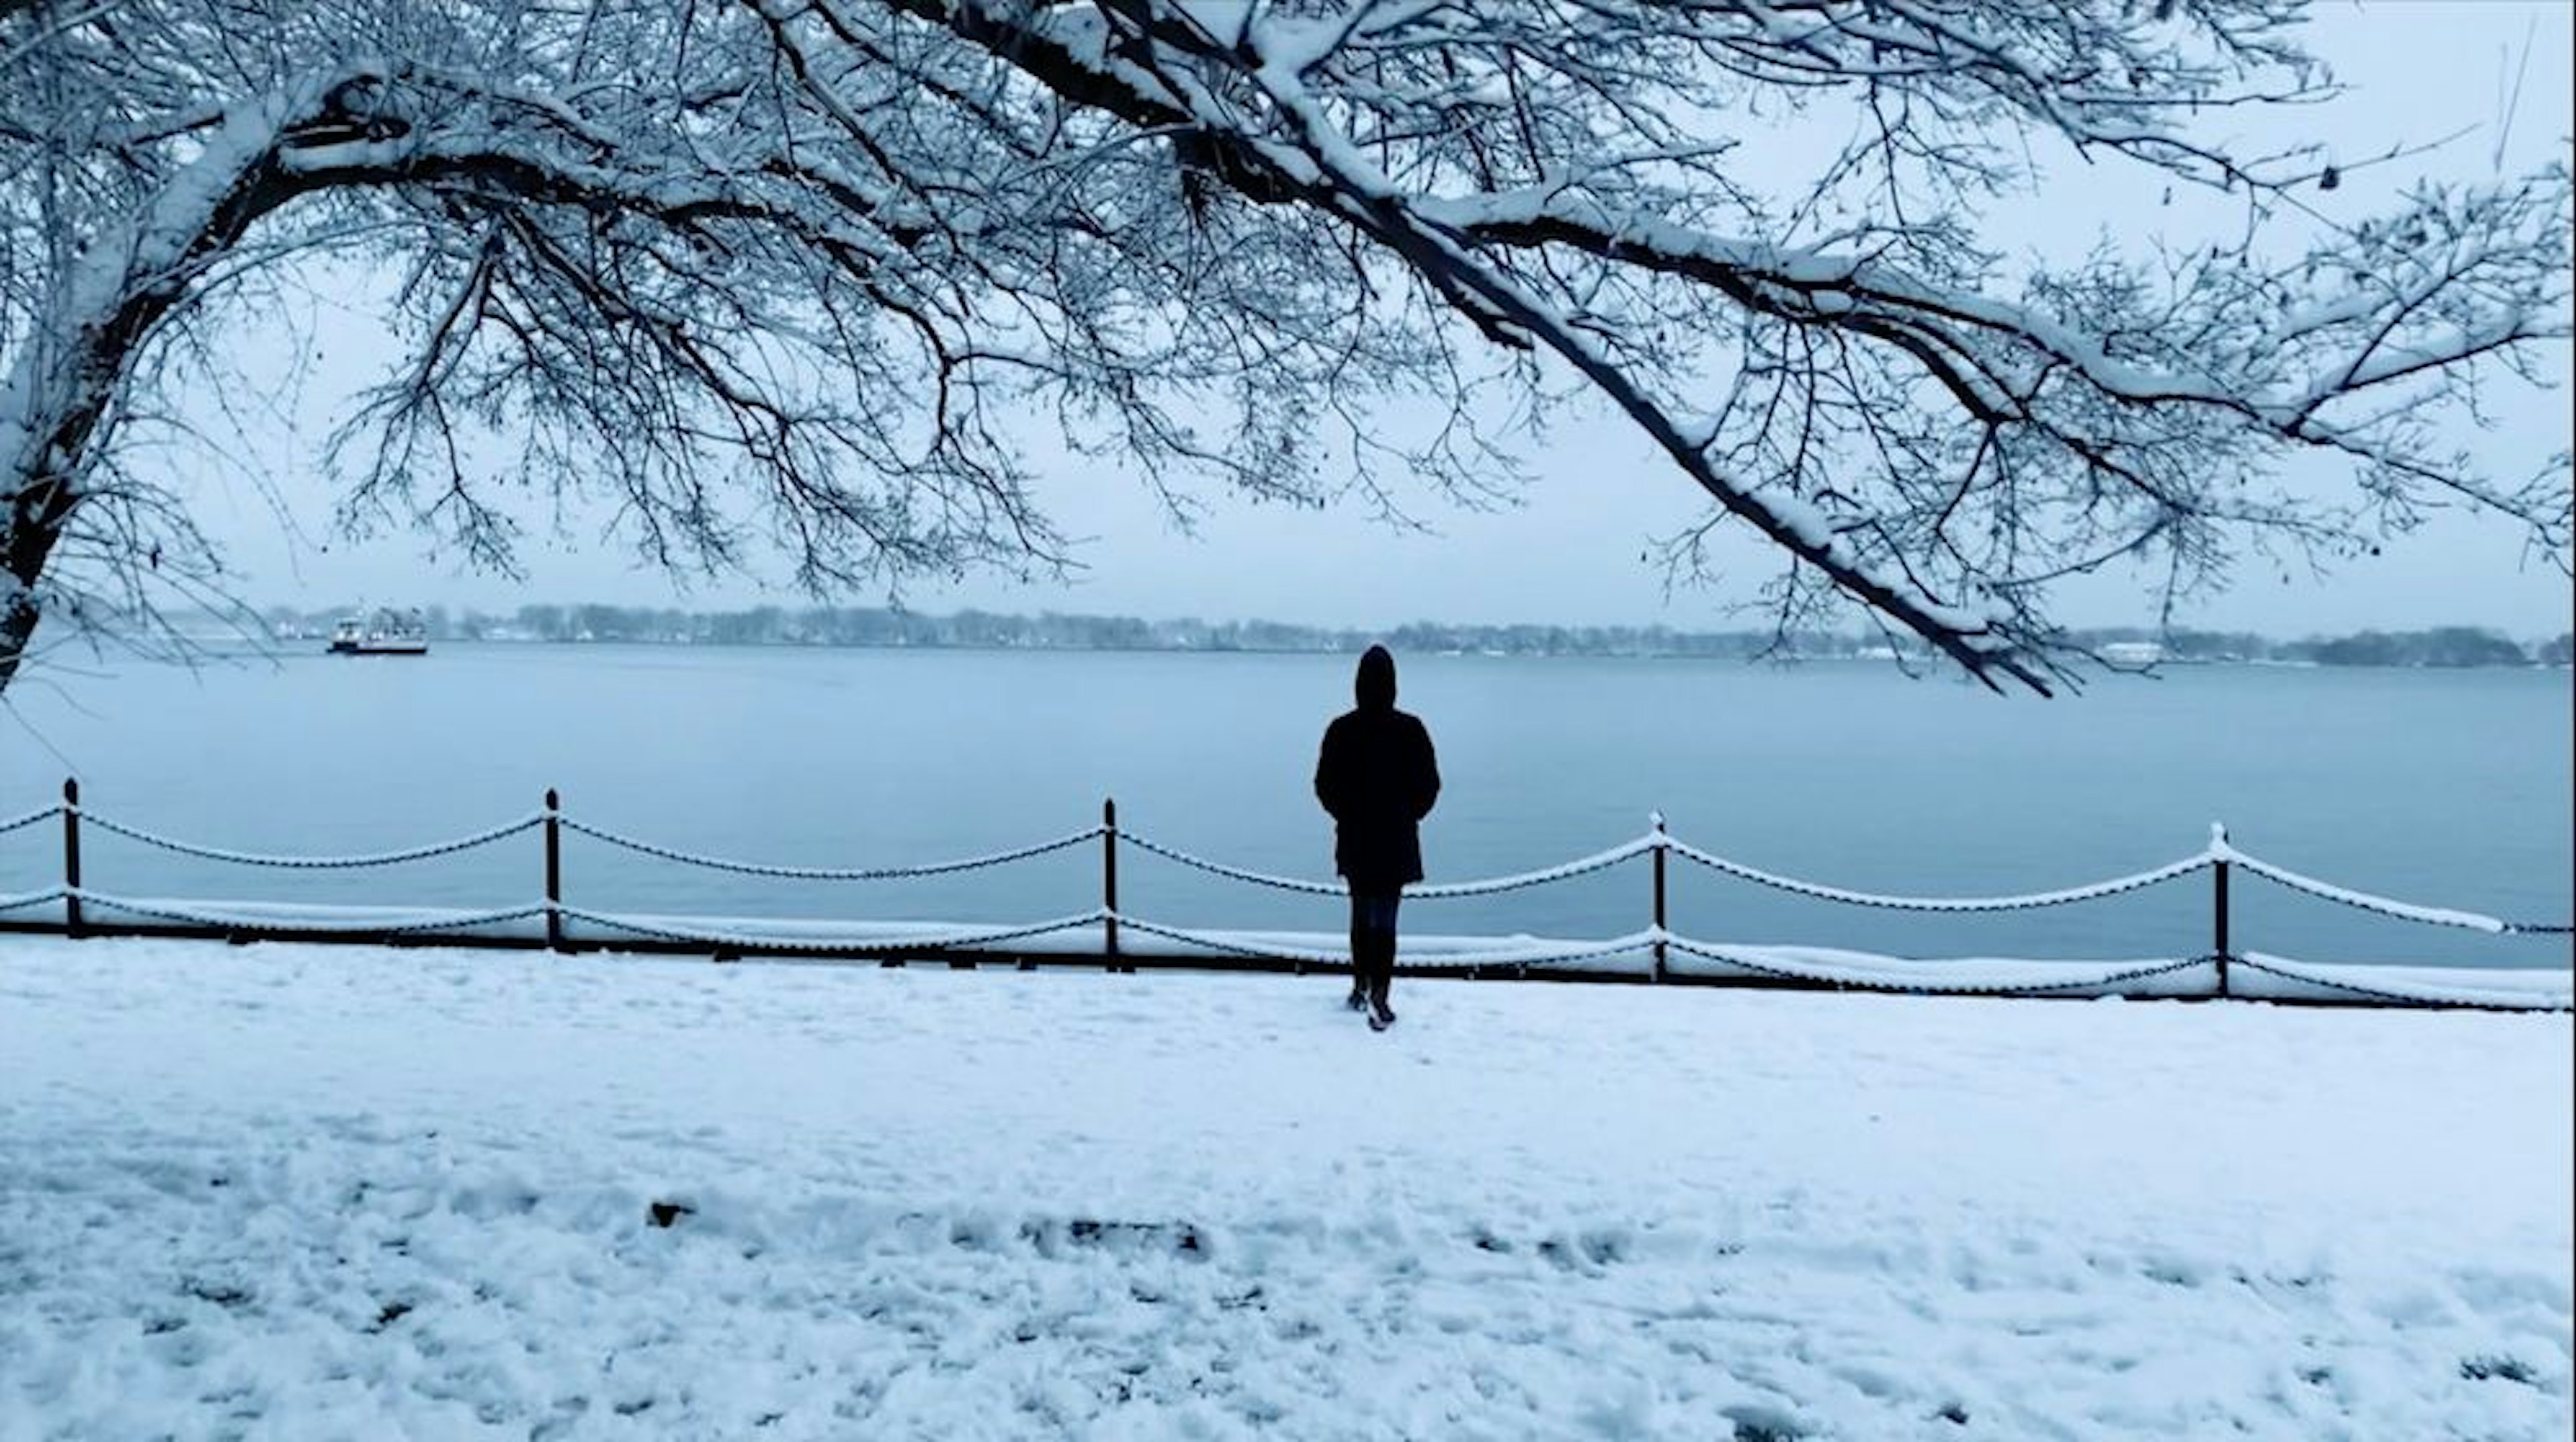 film still showing a winter snowy landscape depicting a person standing by the lake.